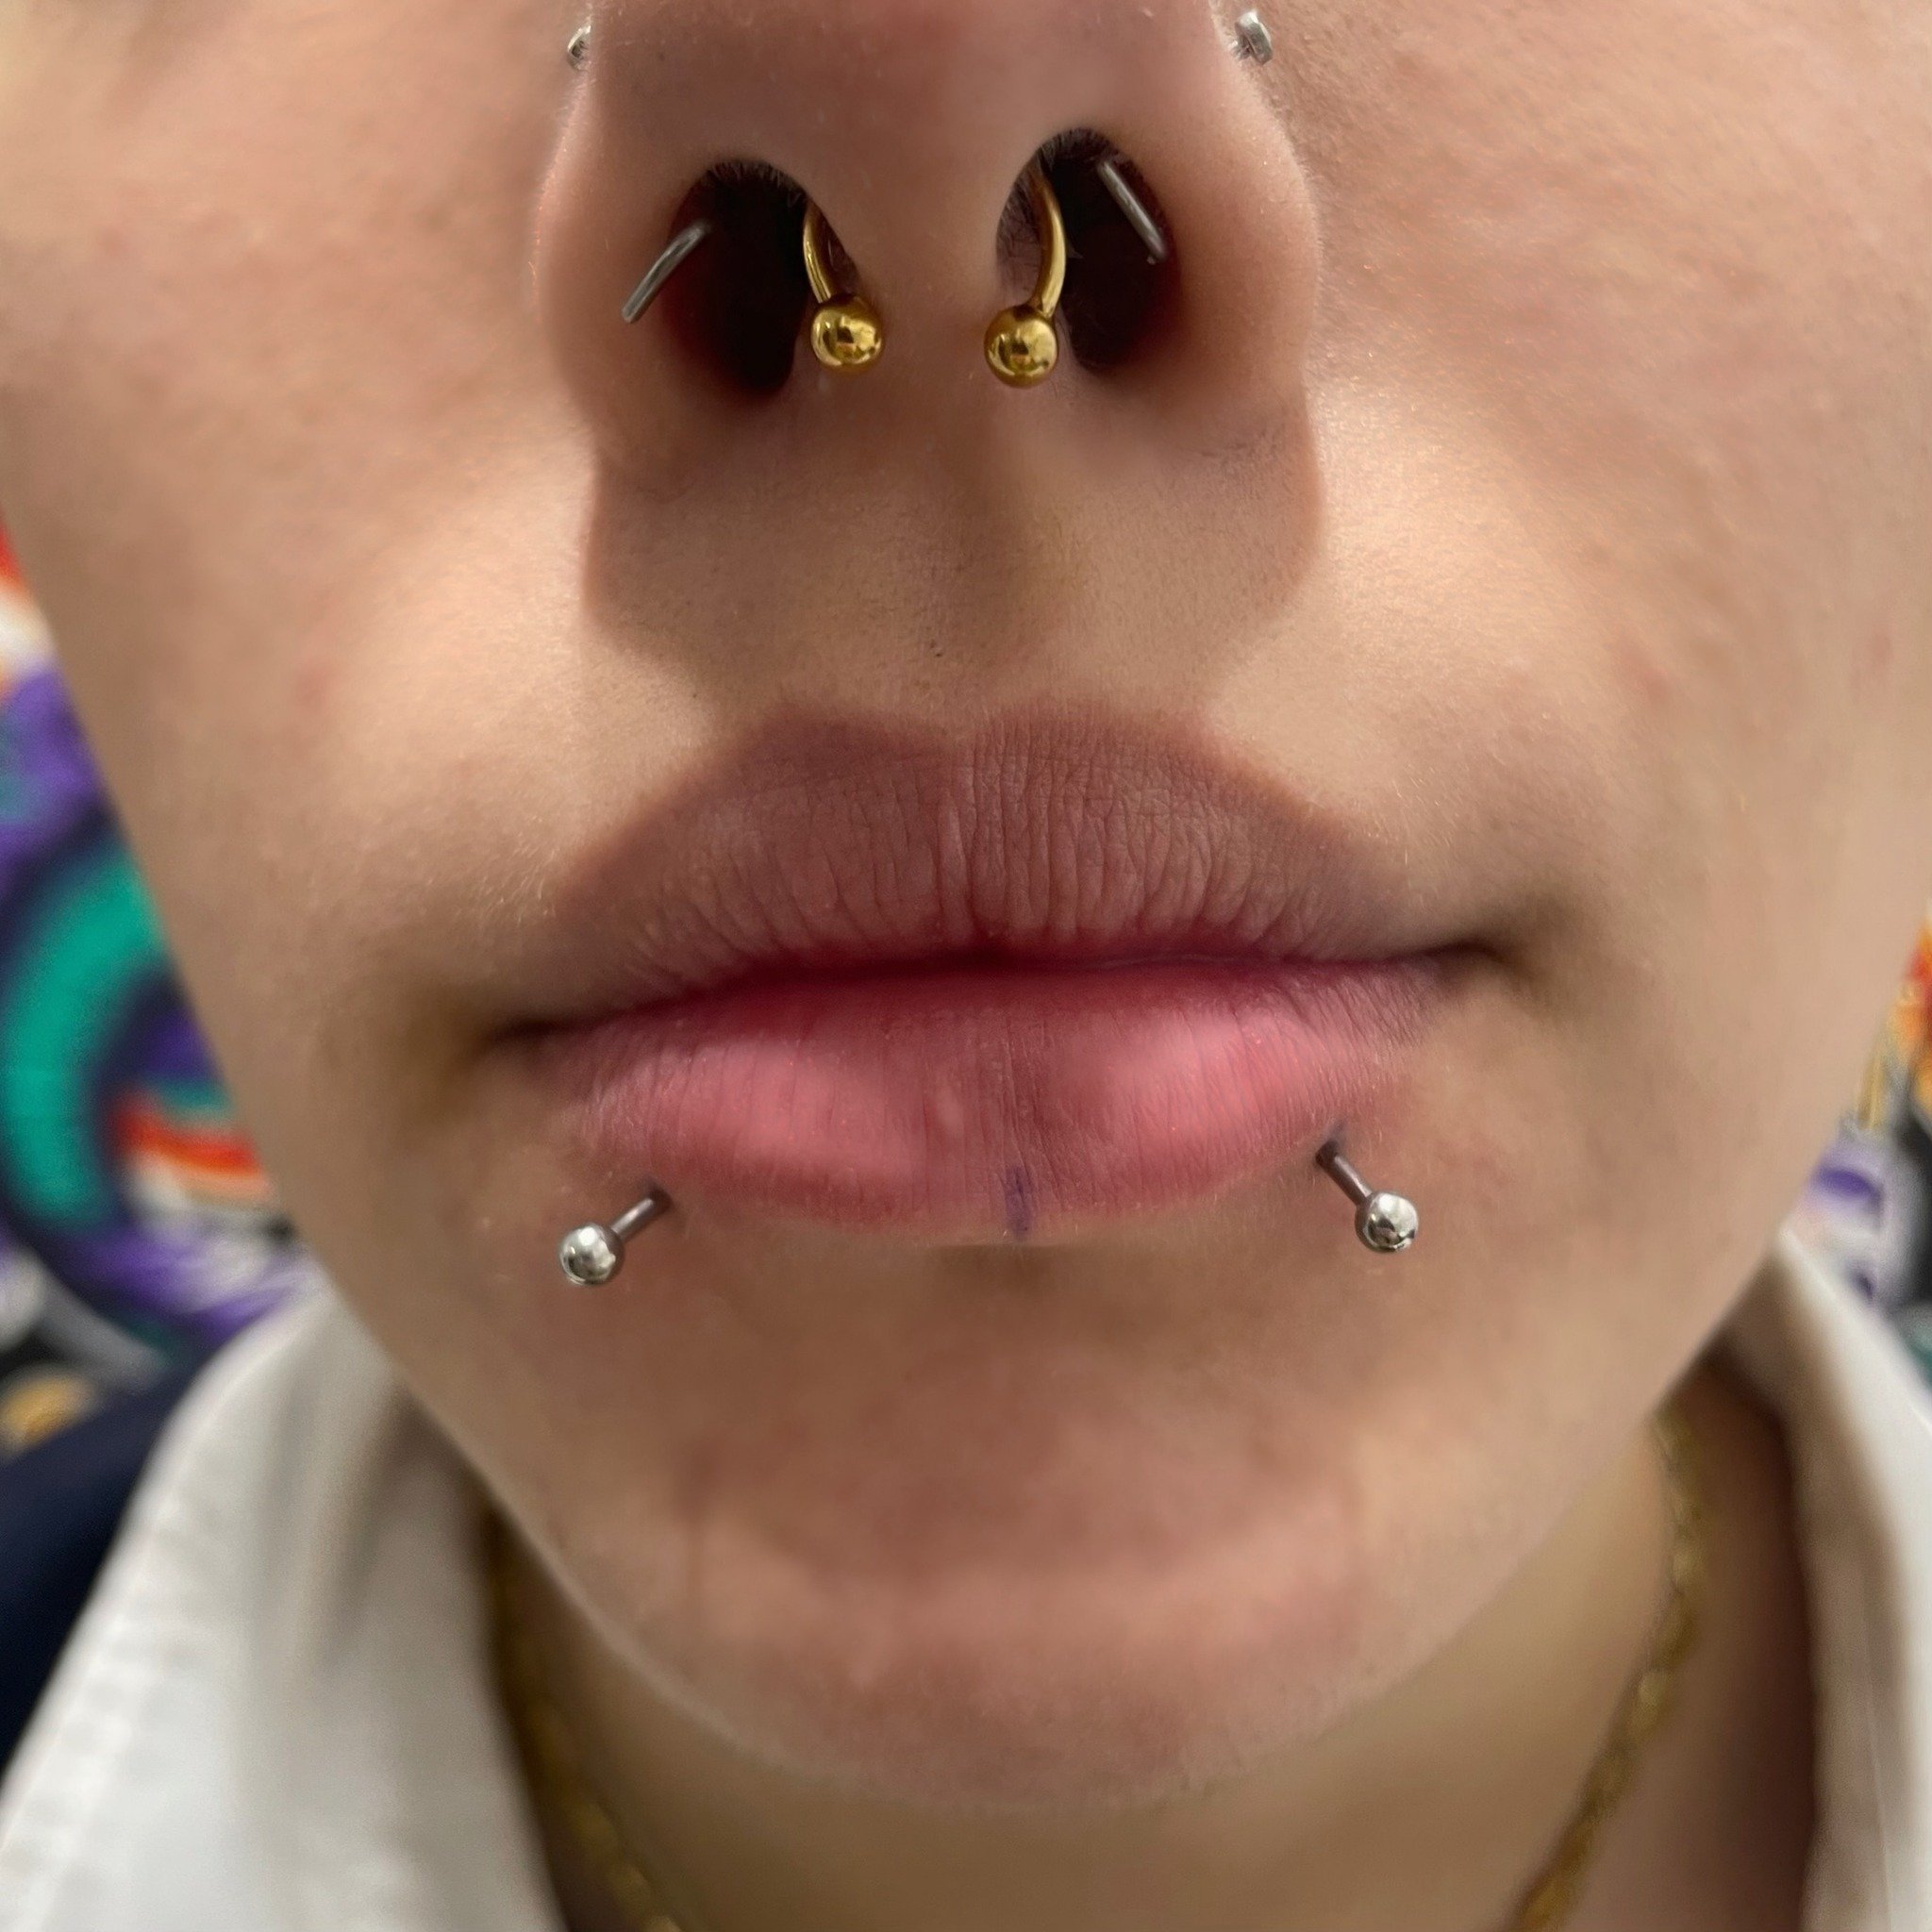 rad pair of snakebites done by @kaylapeacockkk in-store this morning! 🐍👄💉 

today we have both kayla &amp; @ewchelsealee piercing till 5:30pm! 😽

our tarot reader sarah is also in-store 🔮 $60 per 30 mins (cash only)